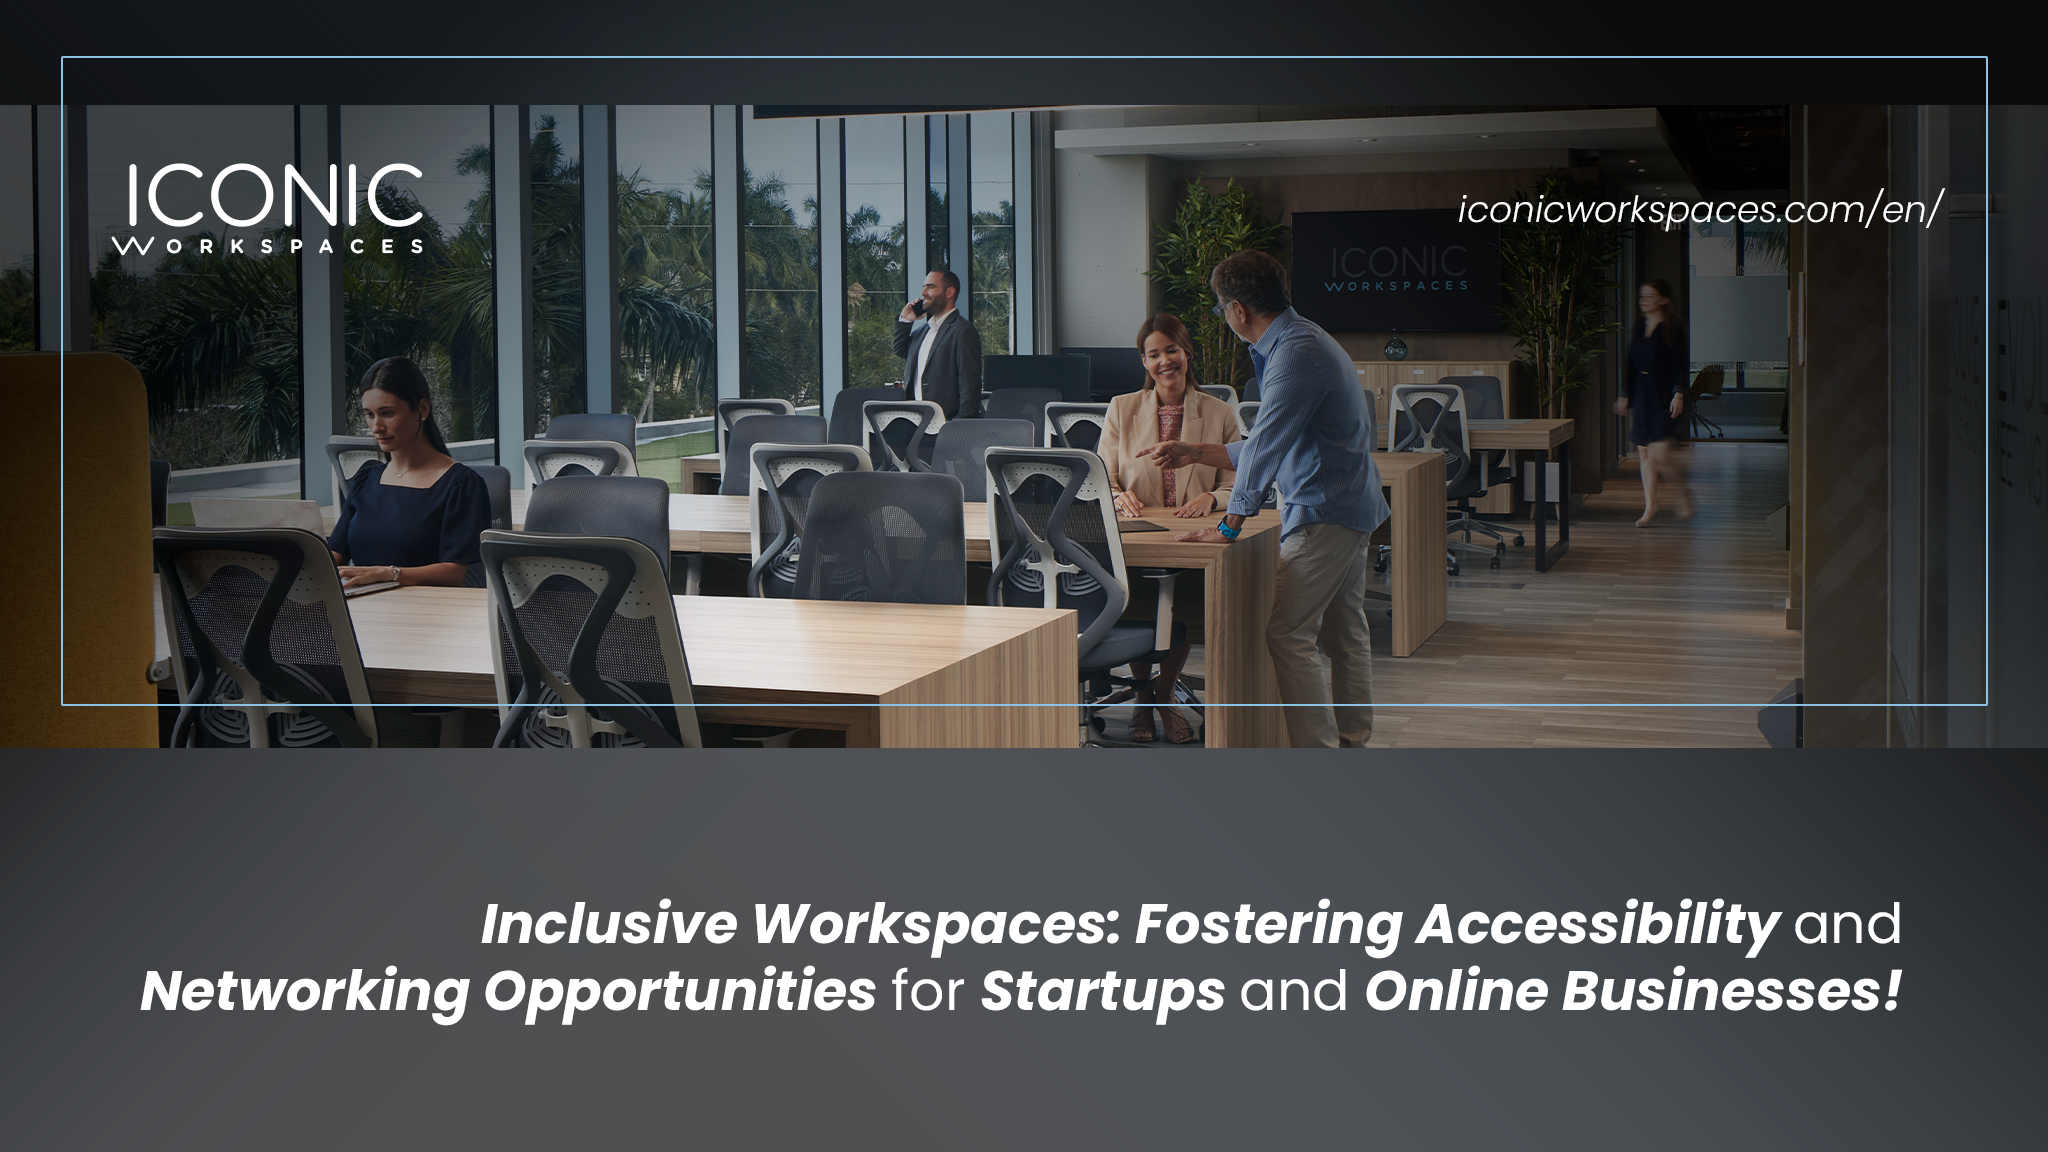 Inclusive Workspaces: Fostering Accessibility and Networking Opportunities for Startups and Online Businesses